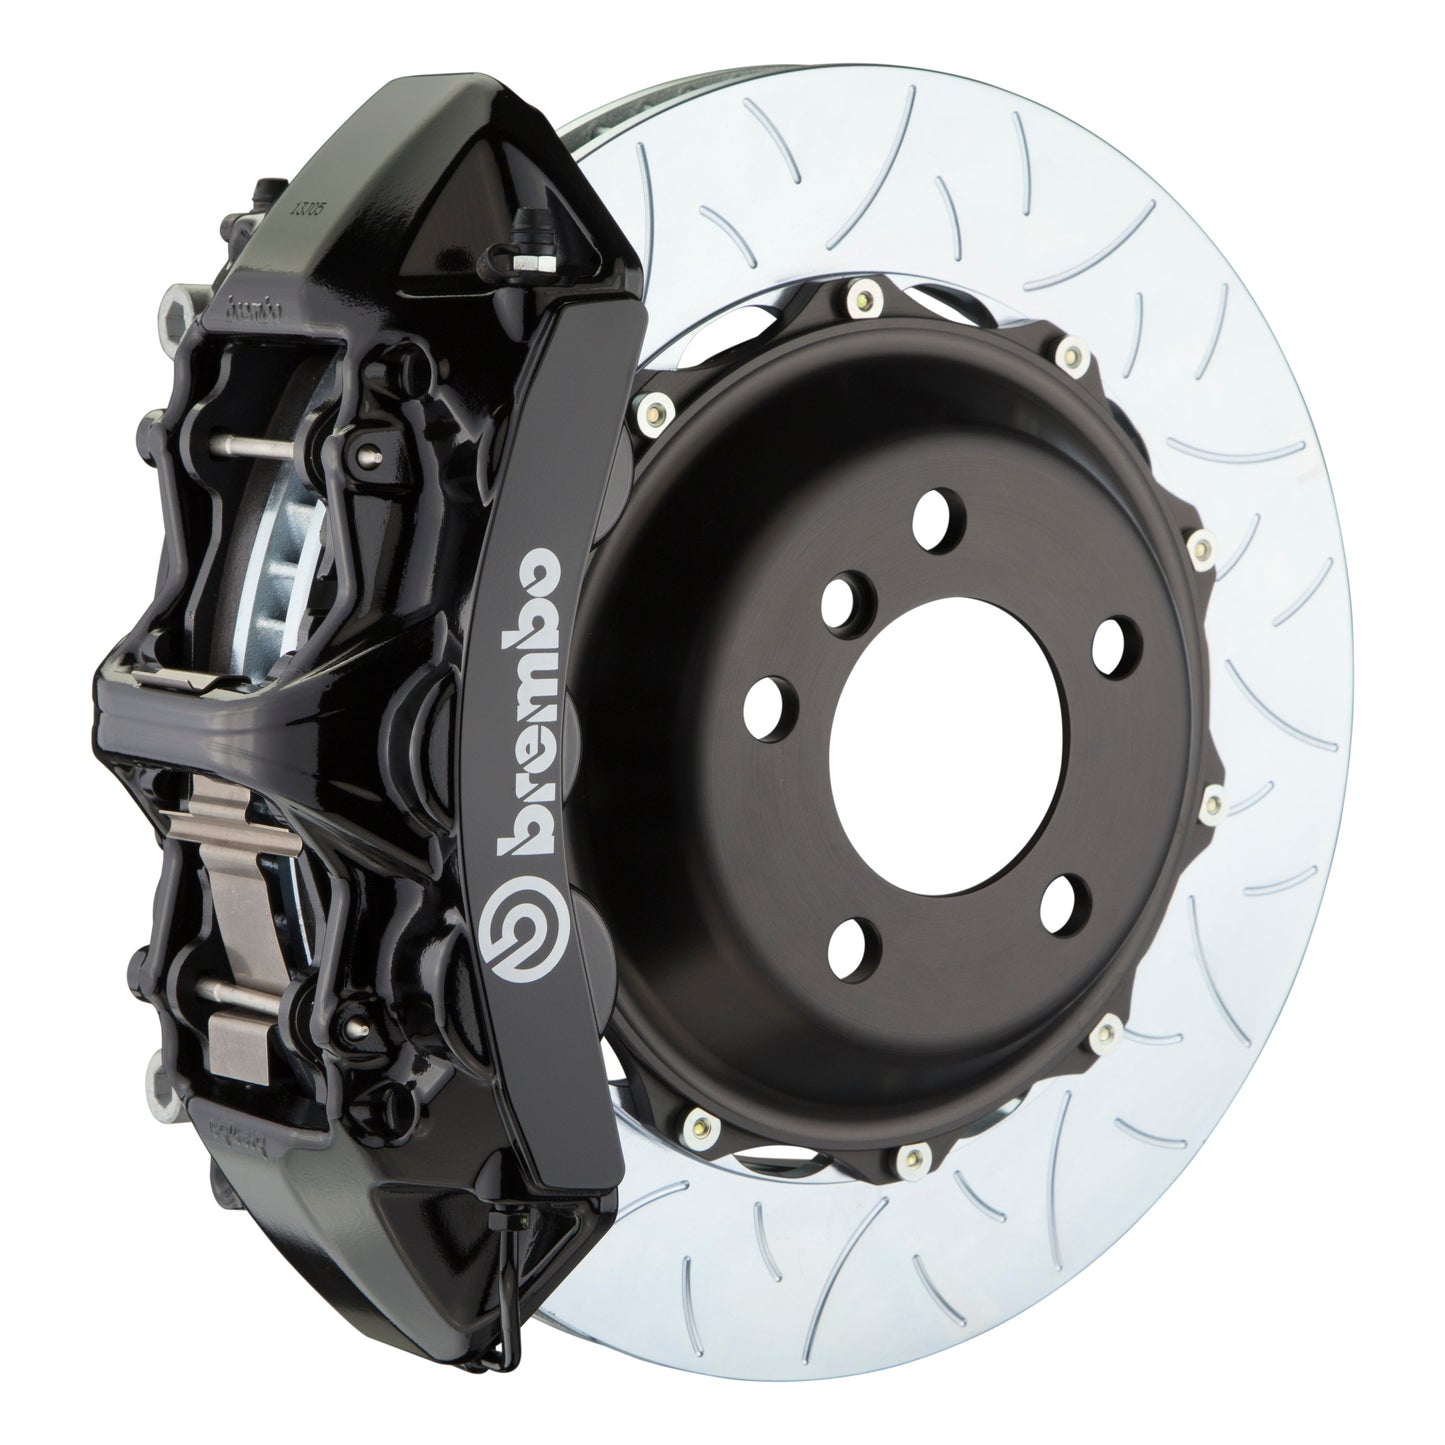 Front Brembo Gran Turismo Braking Upgrade Kit (1M19047A) GT / M6 Caliper with 6-Pistons & 2-piece 380x32 Disc